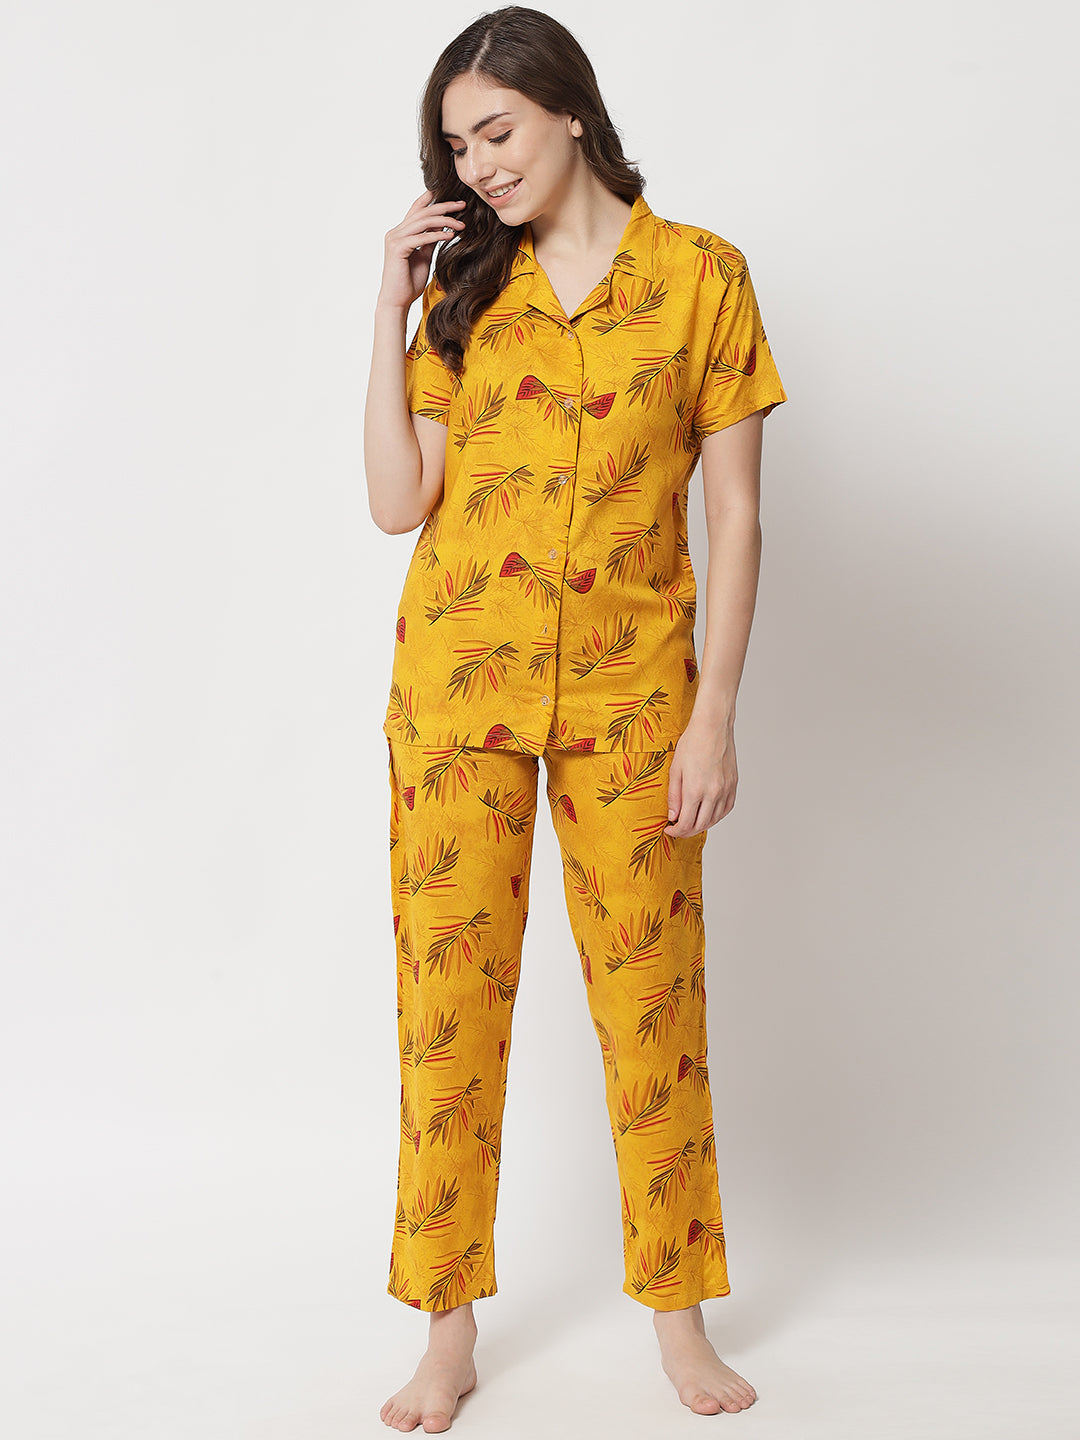 printed-button-down-nightsuit-for-women-n75y0